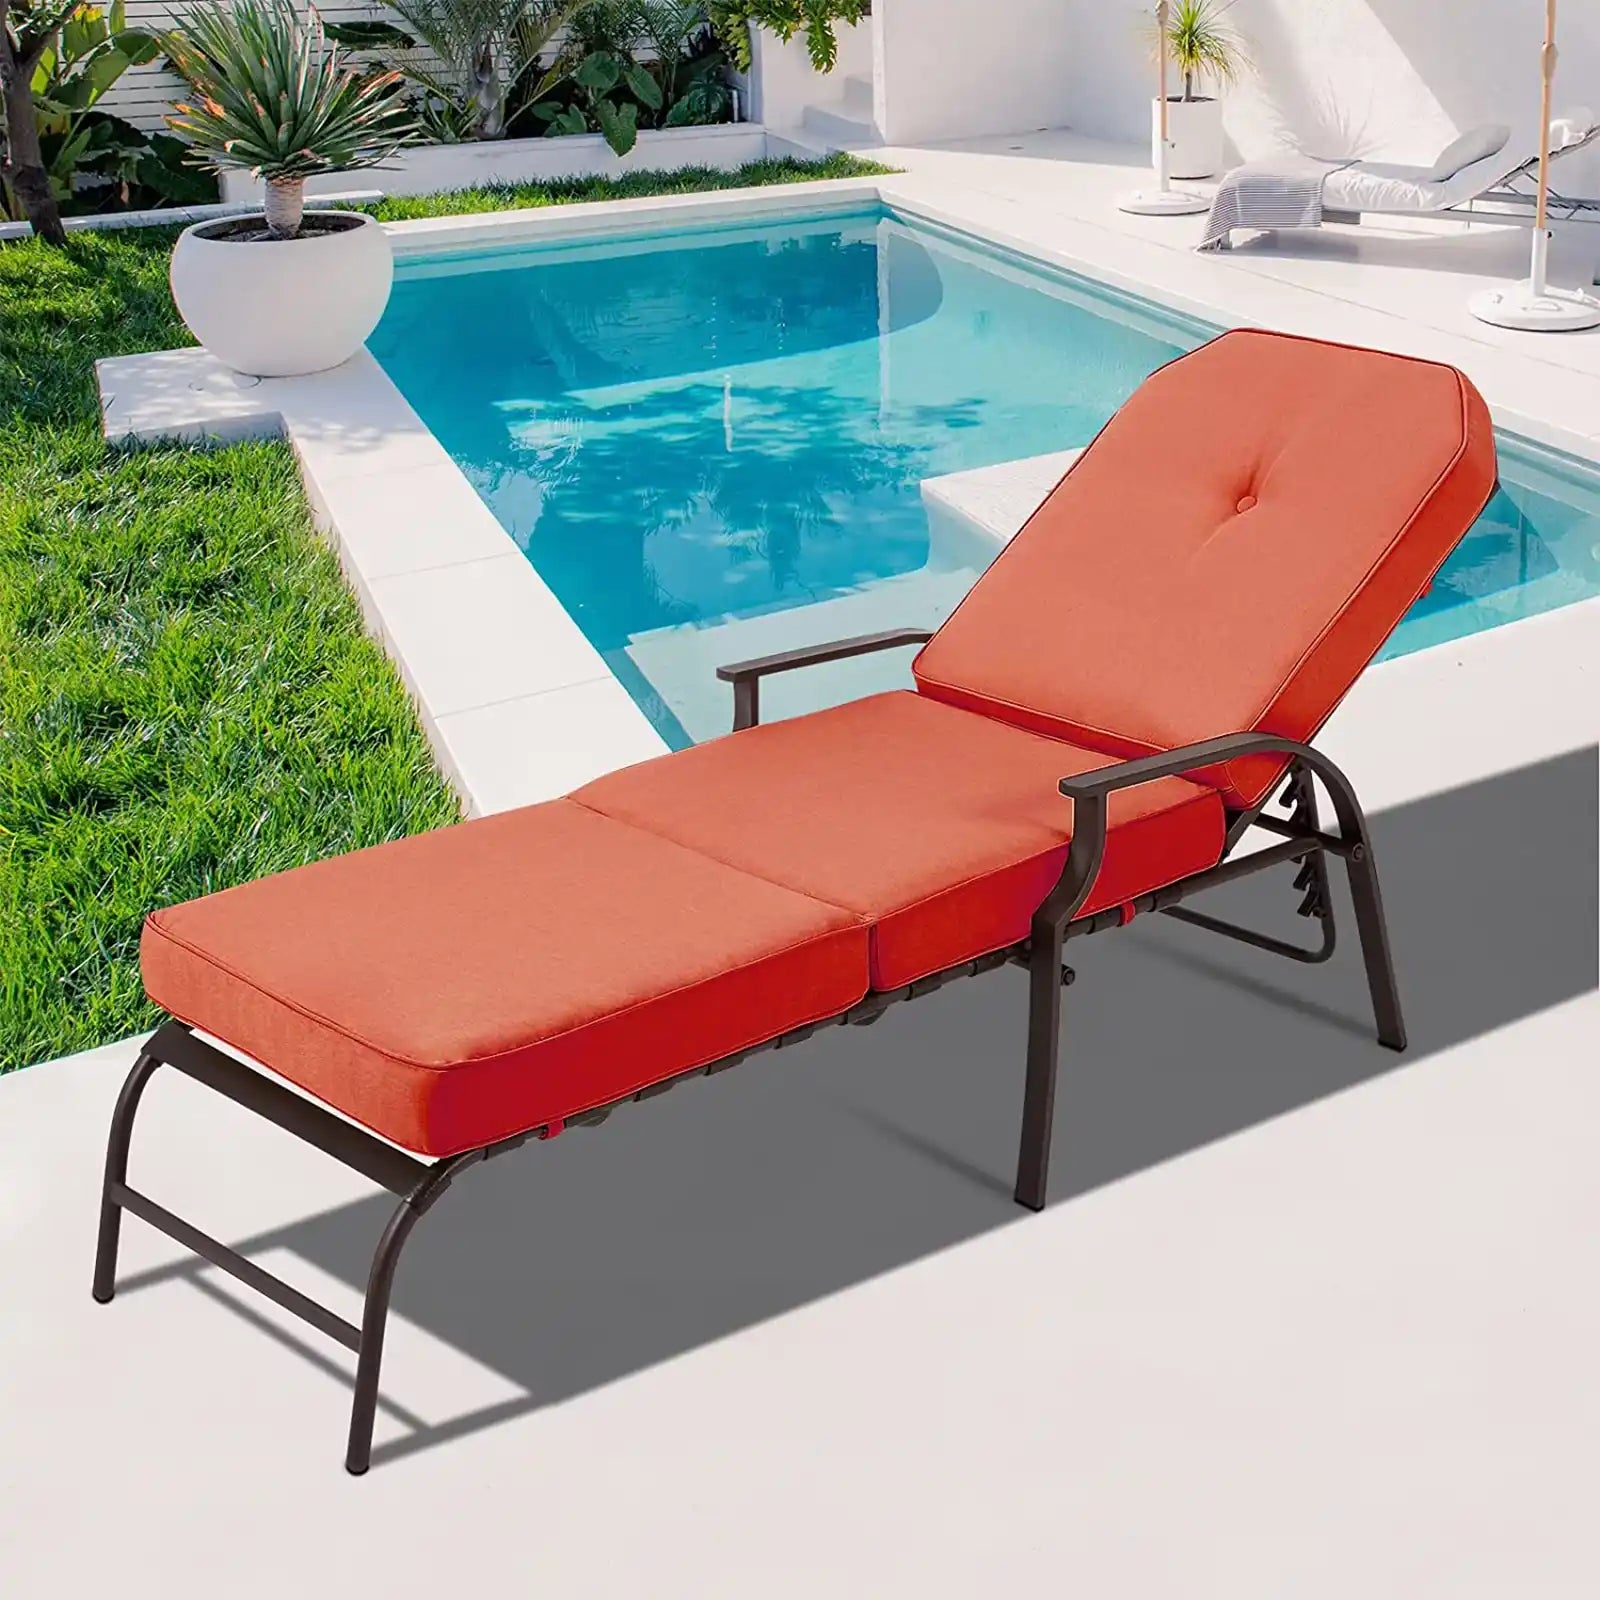 Adjustable Outdoor Chaise Lounge Chair for Patio, Poolside with UV-Resistant Cushion